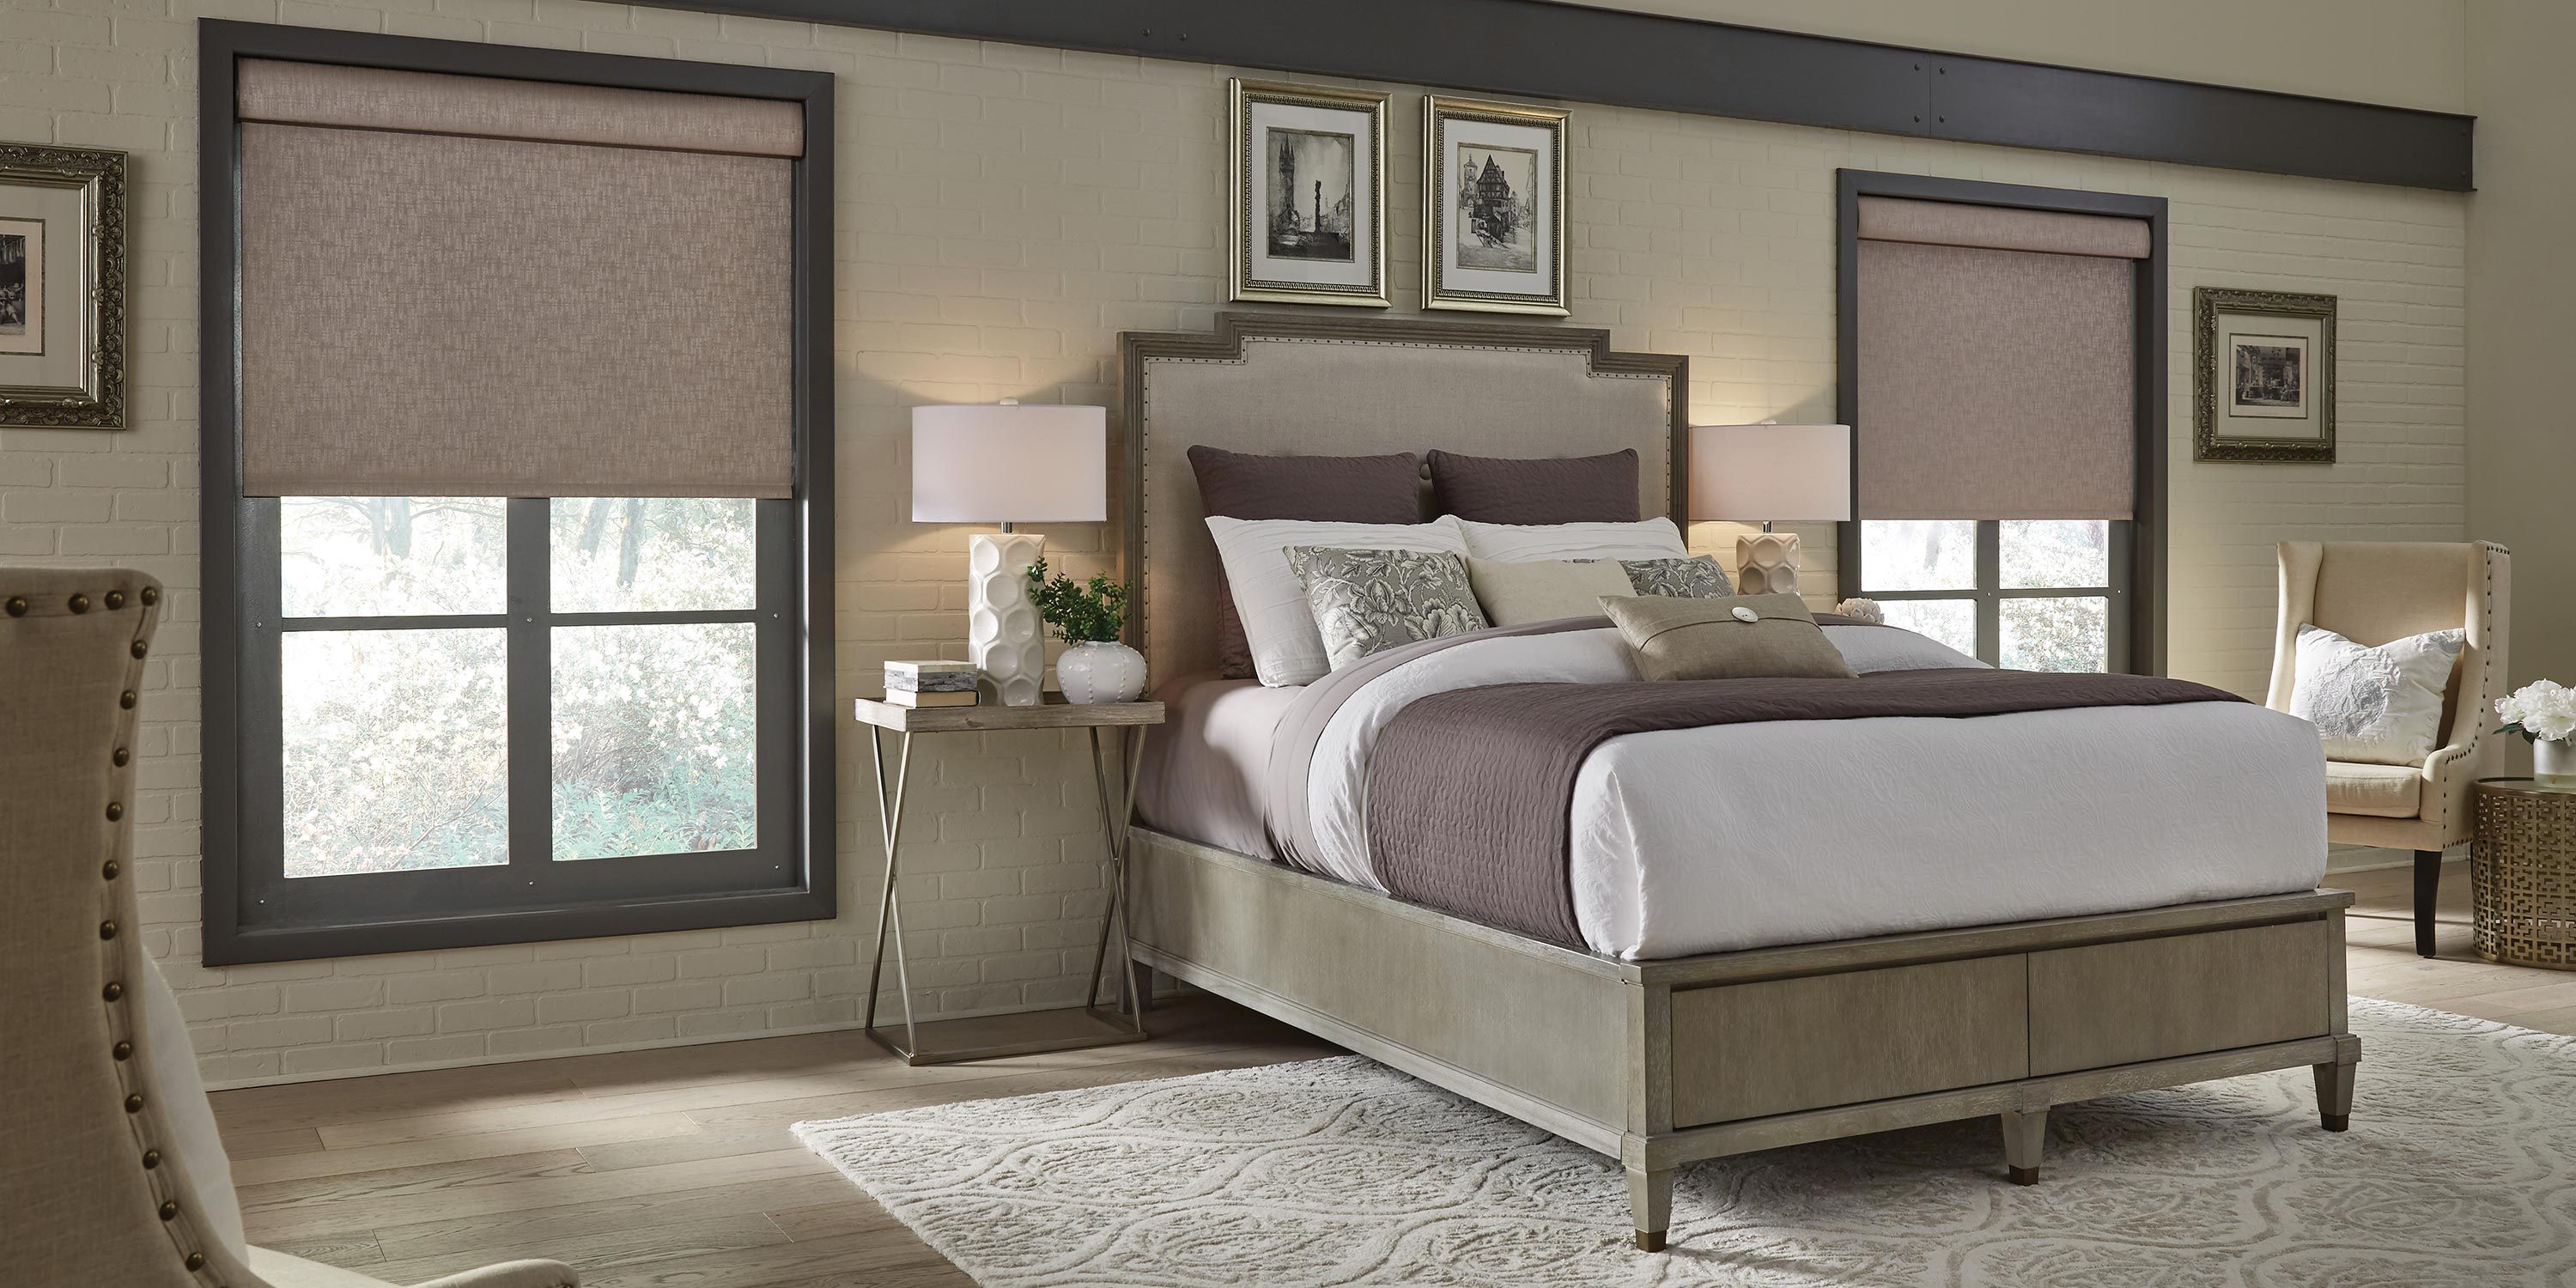 Lutron Bedroom in neutral colors with halfway open shades